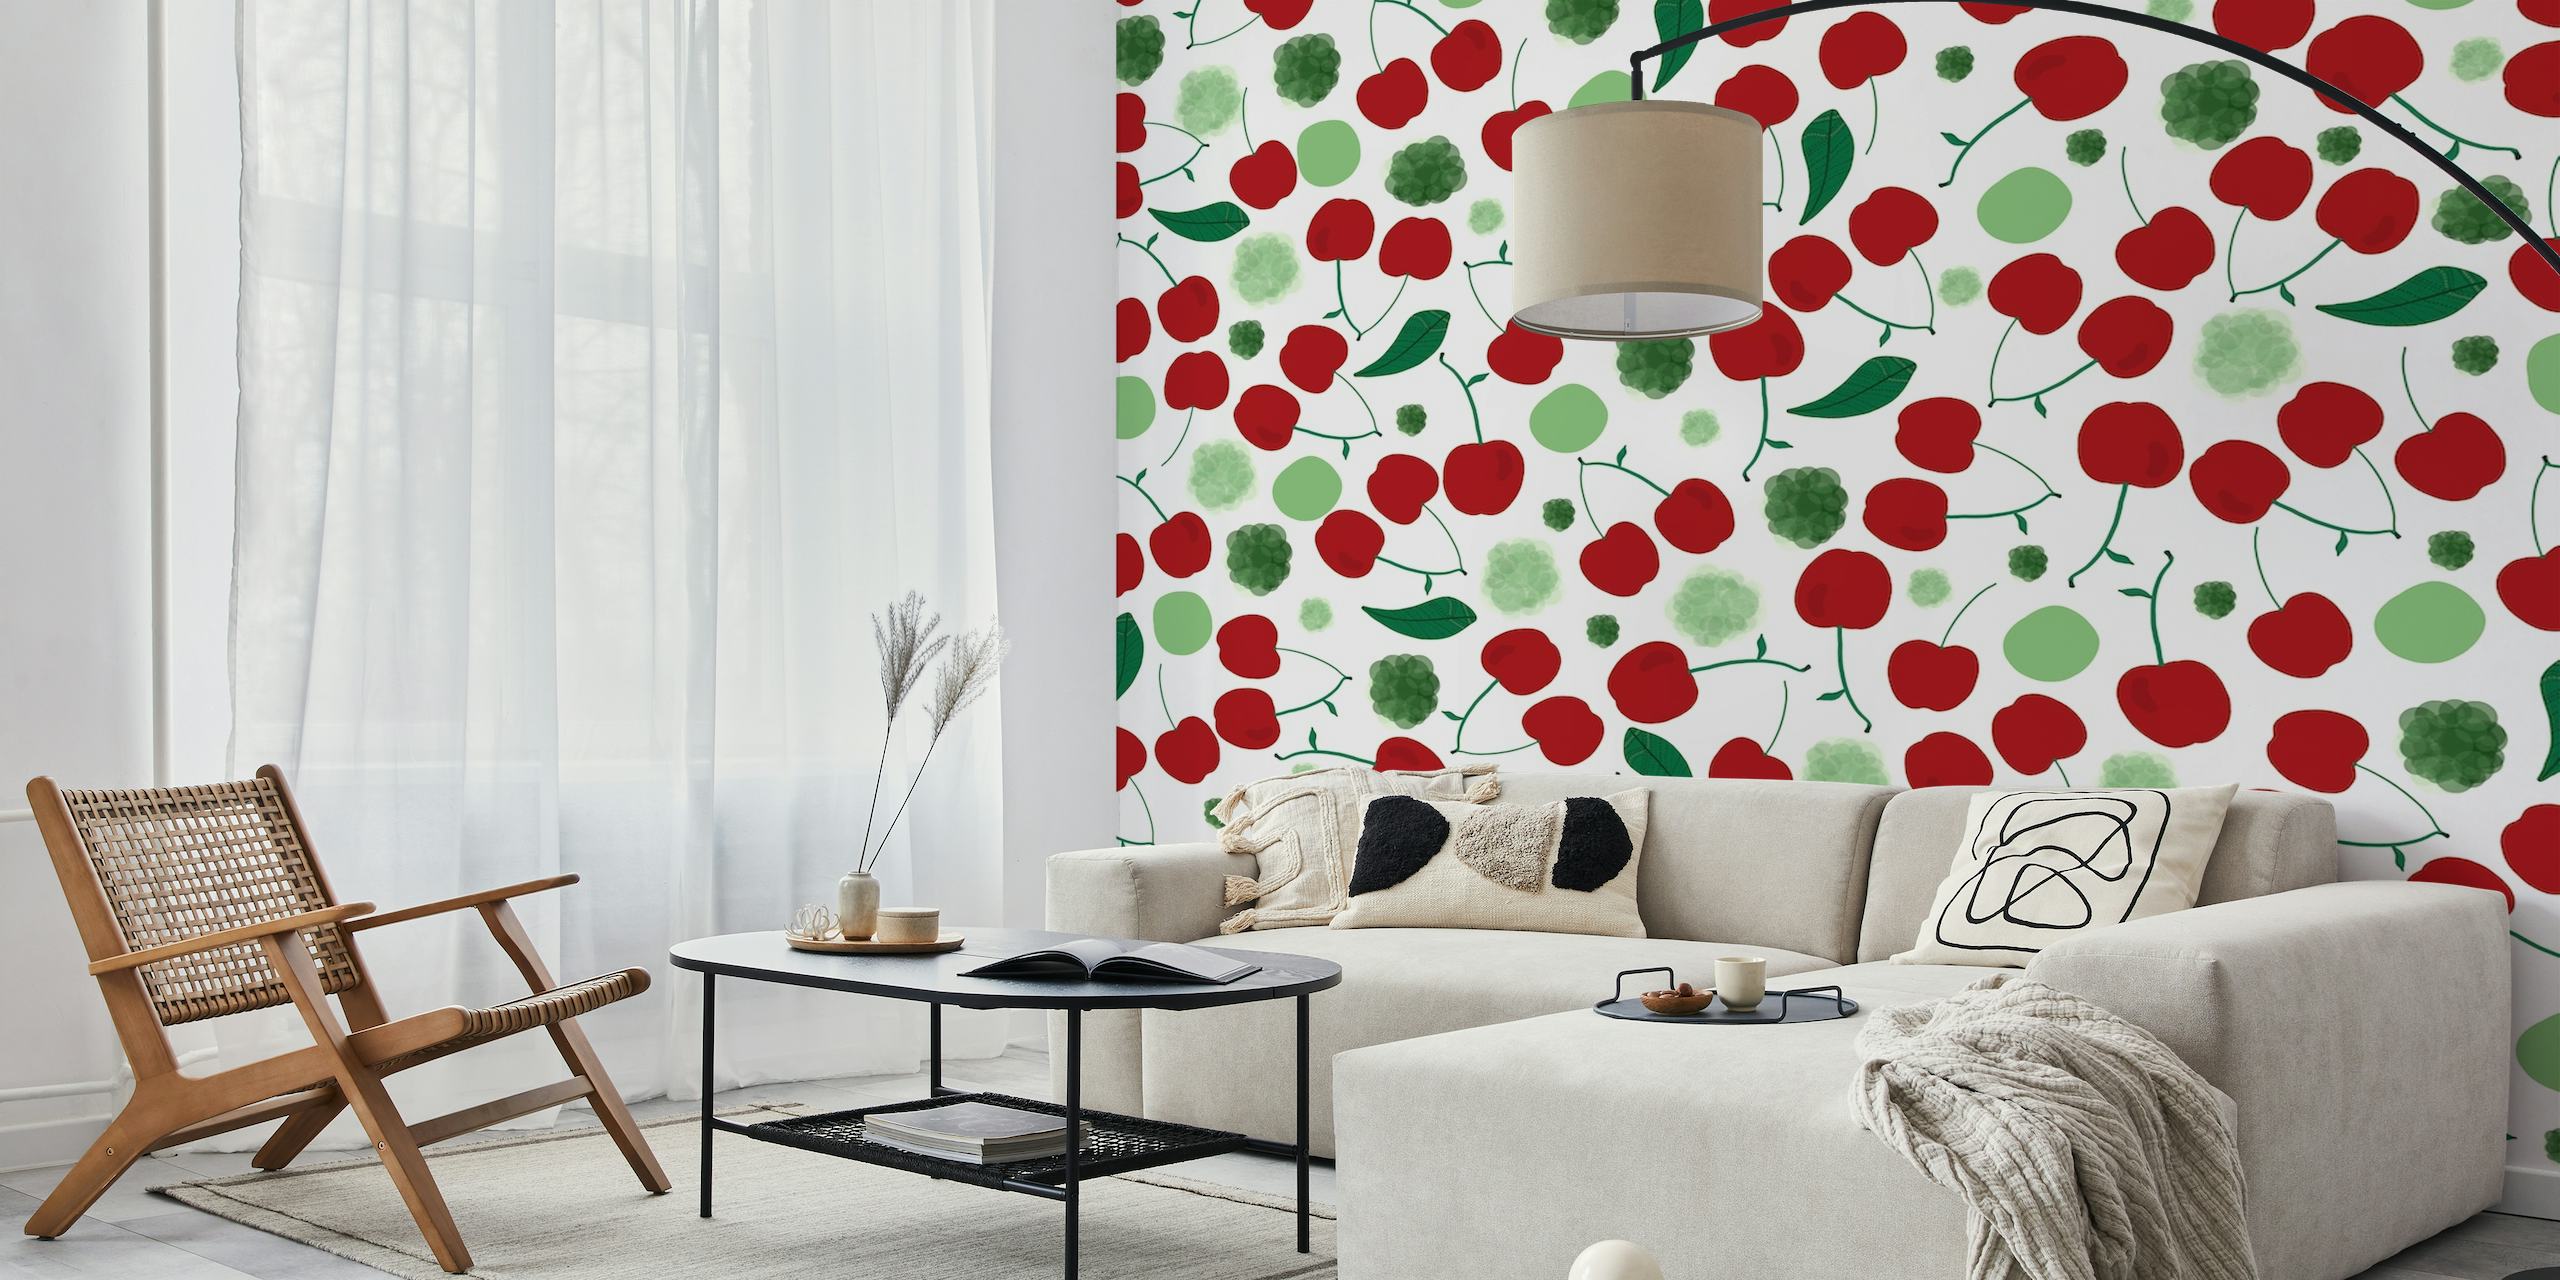 Cherries with shining dots wallpaper